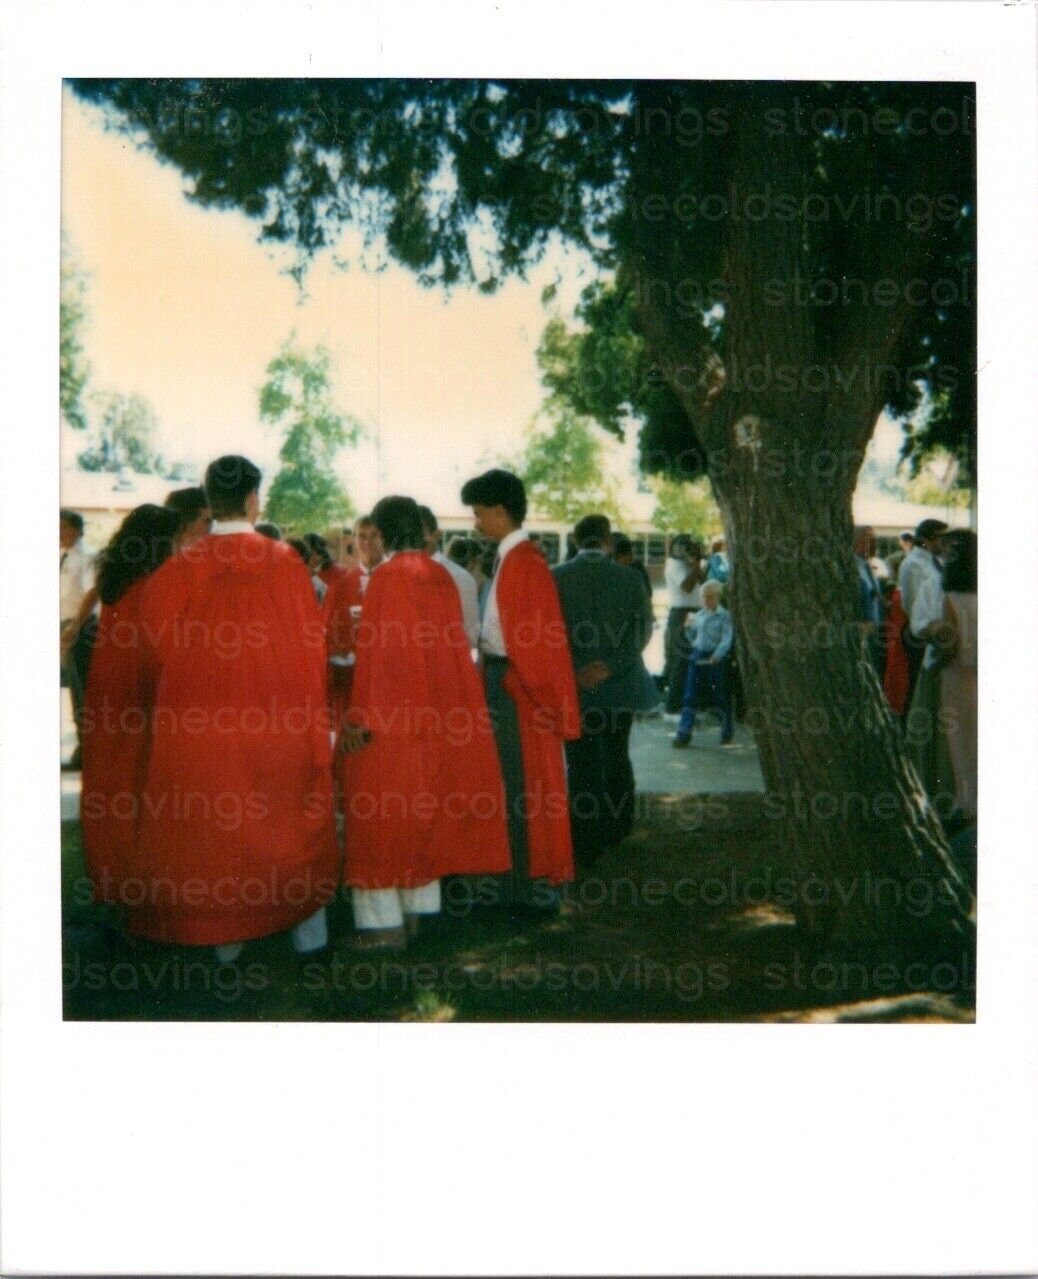 VTG 1980S FOUND PHOTO - POLAROID GRADUATION DAY STUDENTS IN RED ROBES CEREMONY